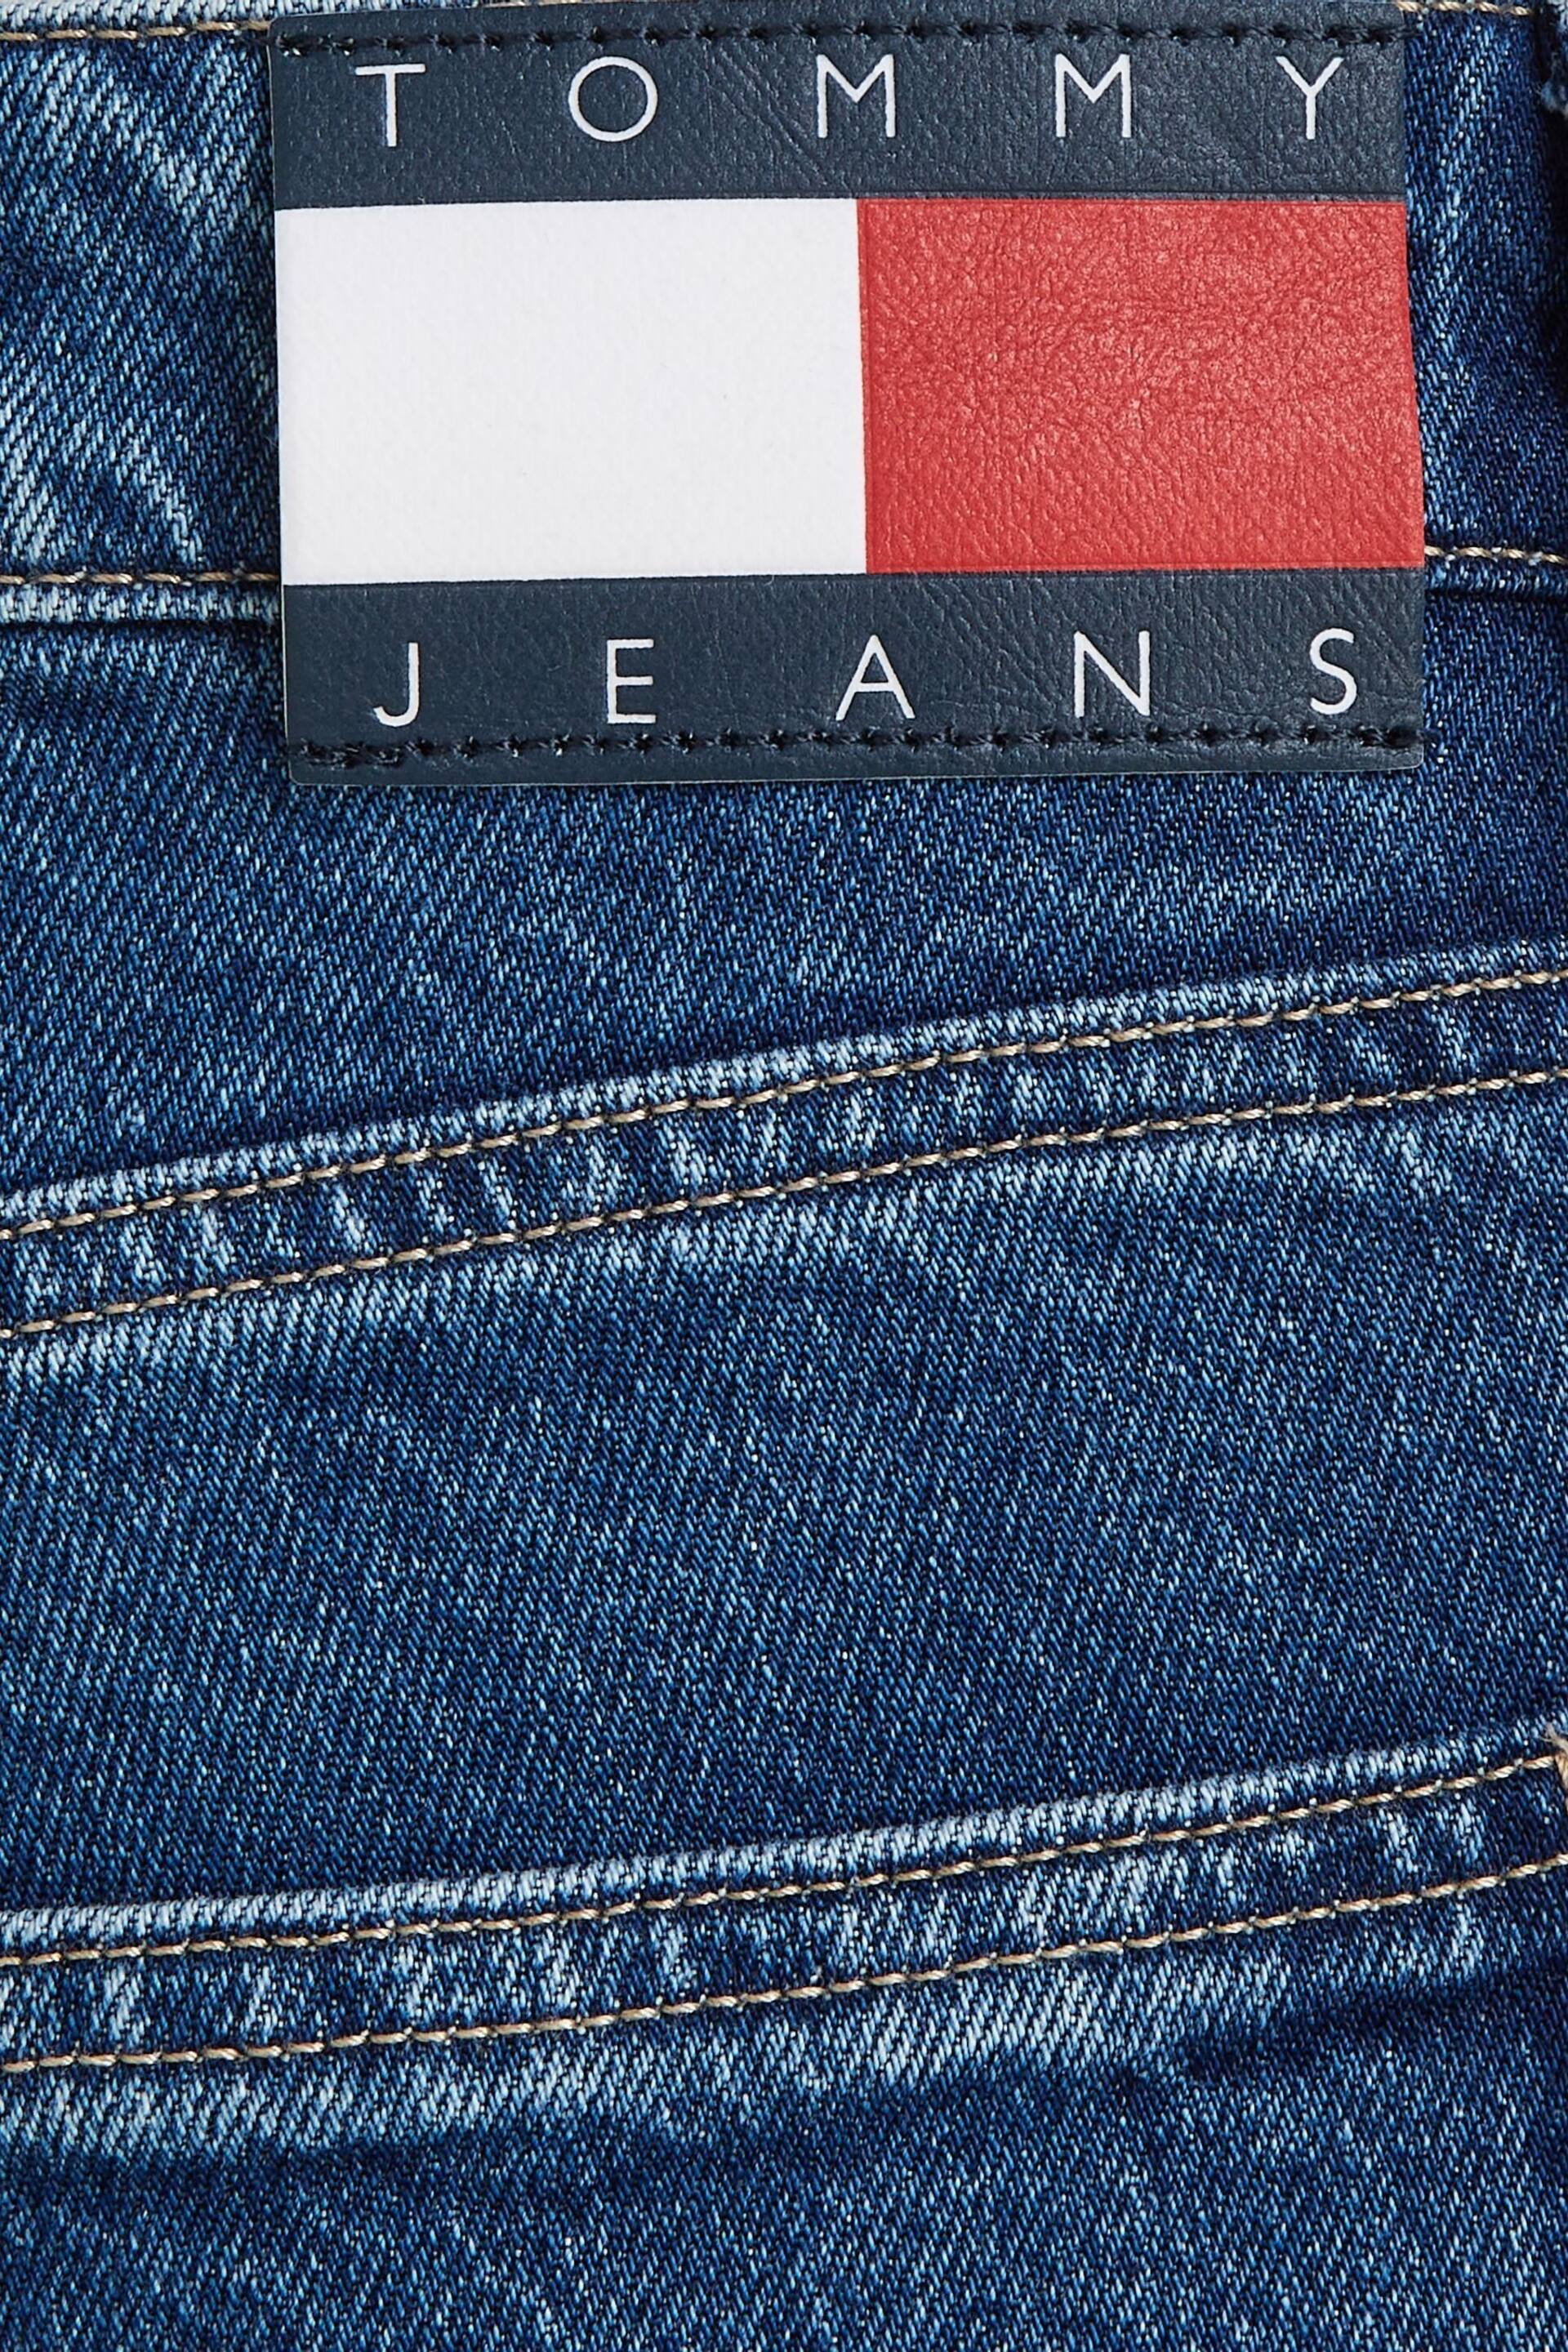 Tommy Jeans Ryan Regular Straight Fit Jeans - Image 6 of 6